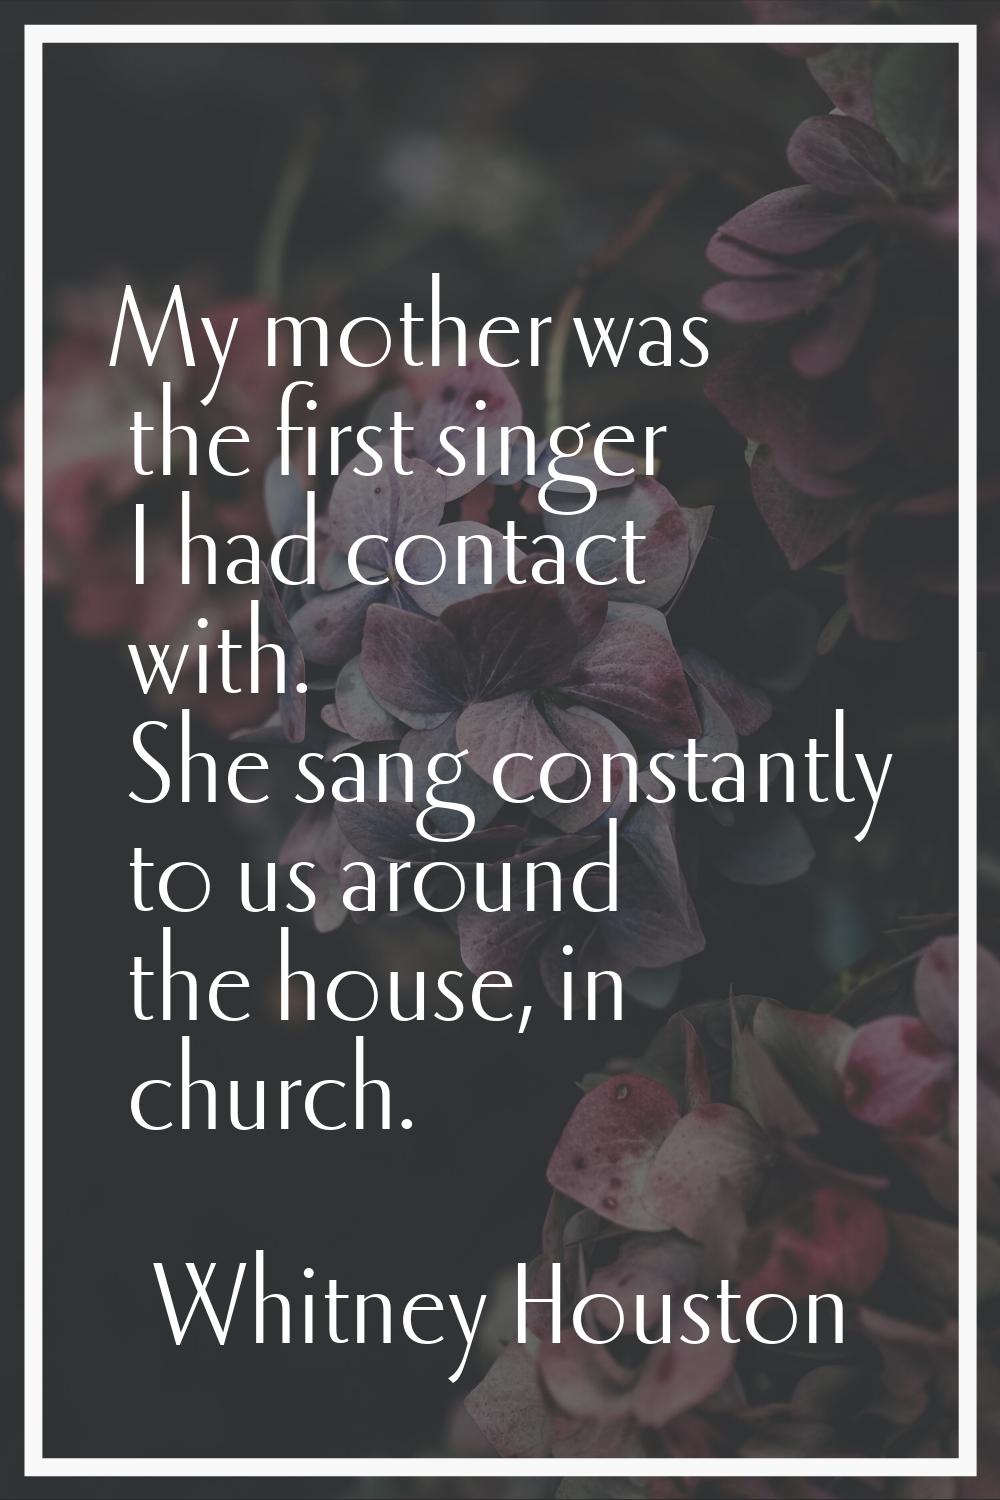 My mother was the first singer I had contact with. She sang constantly to us around the house, in c